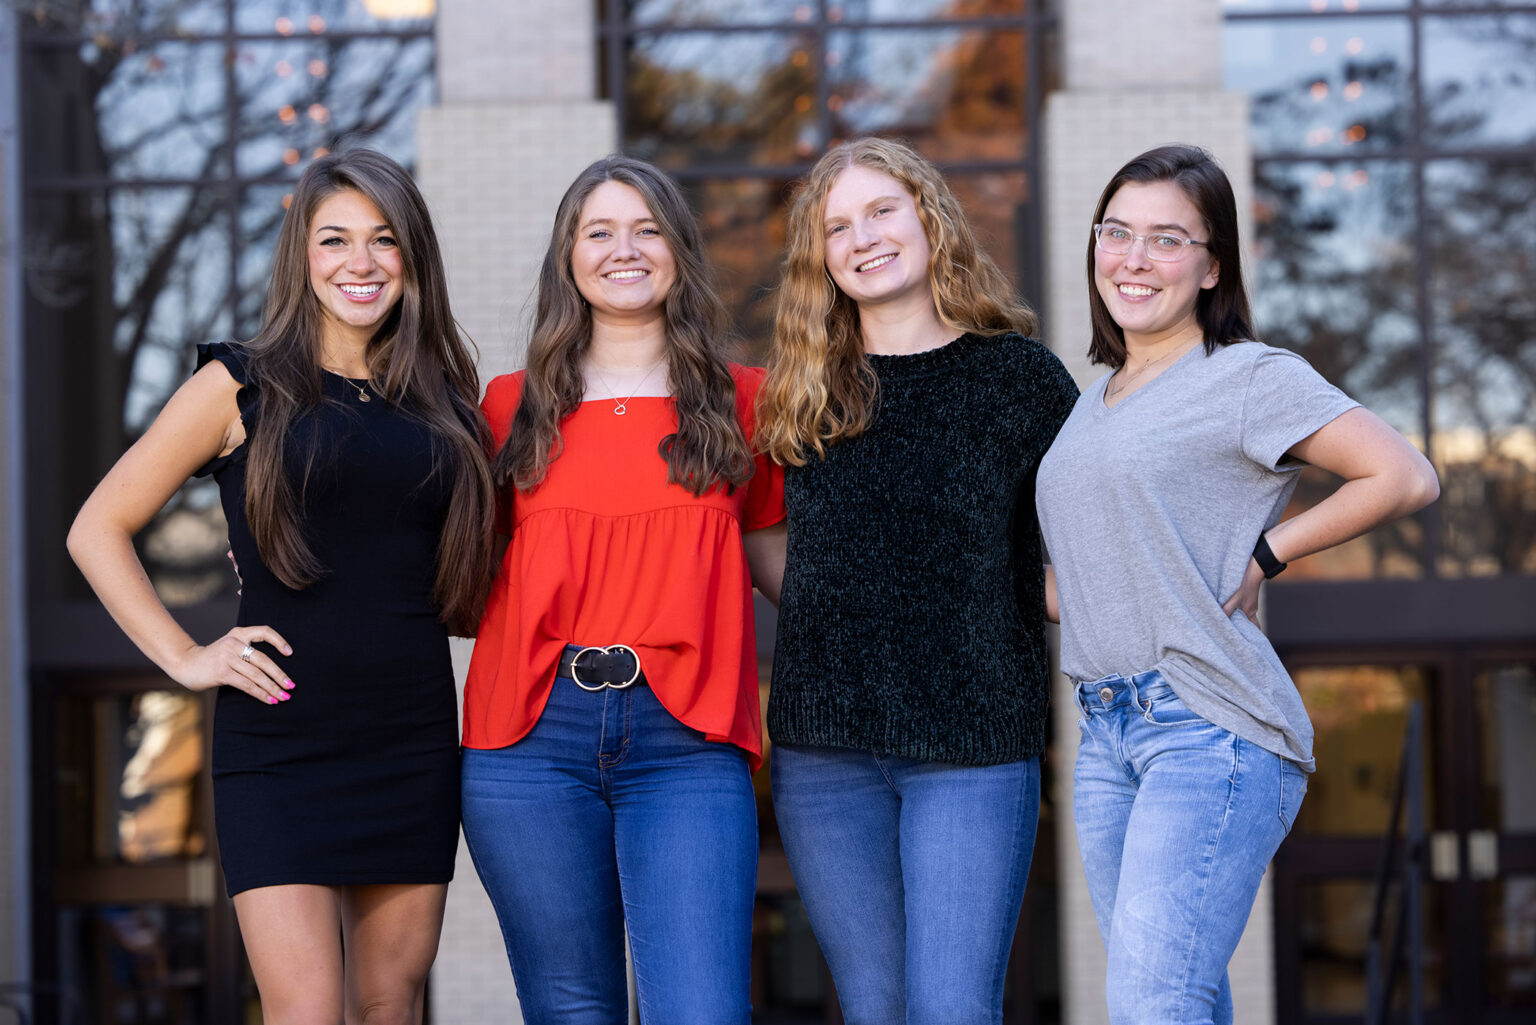 The first cohort of the Rural Scholars Program are wrapping up their first semester on campus: (from left) Georgia Orman, Gracie Grimes, Mary Anne McCord and Aubrey Fraser-Tarpley. (Photo by Andrew Davis Tucker/UGA)